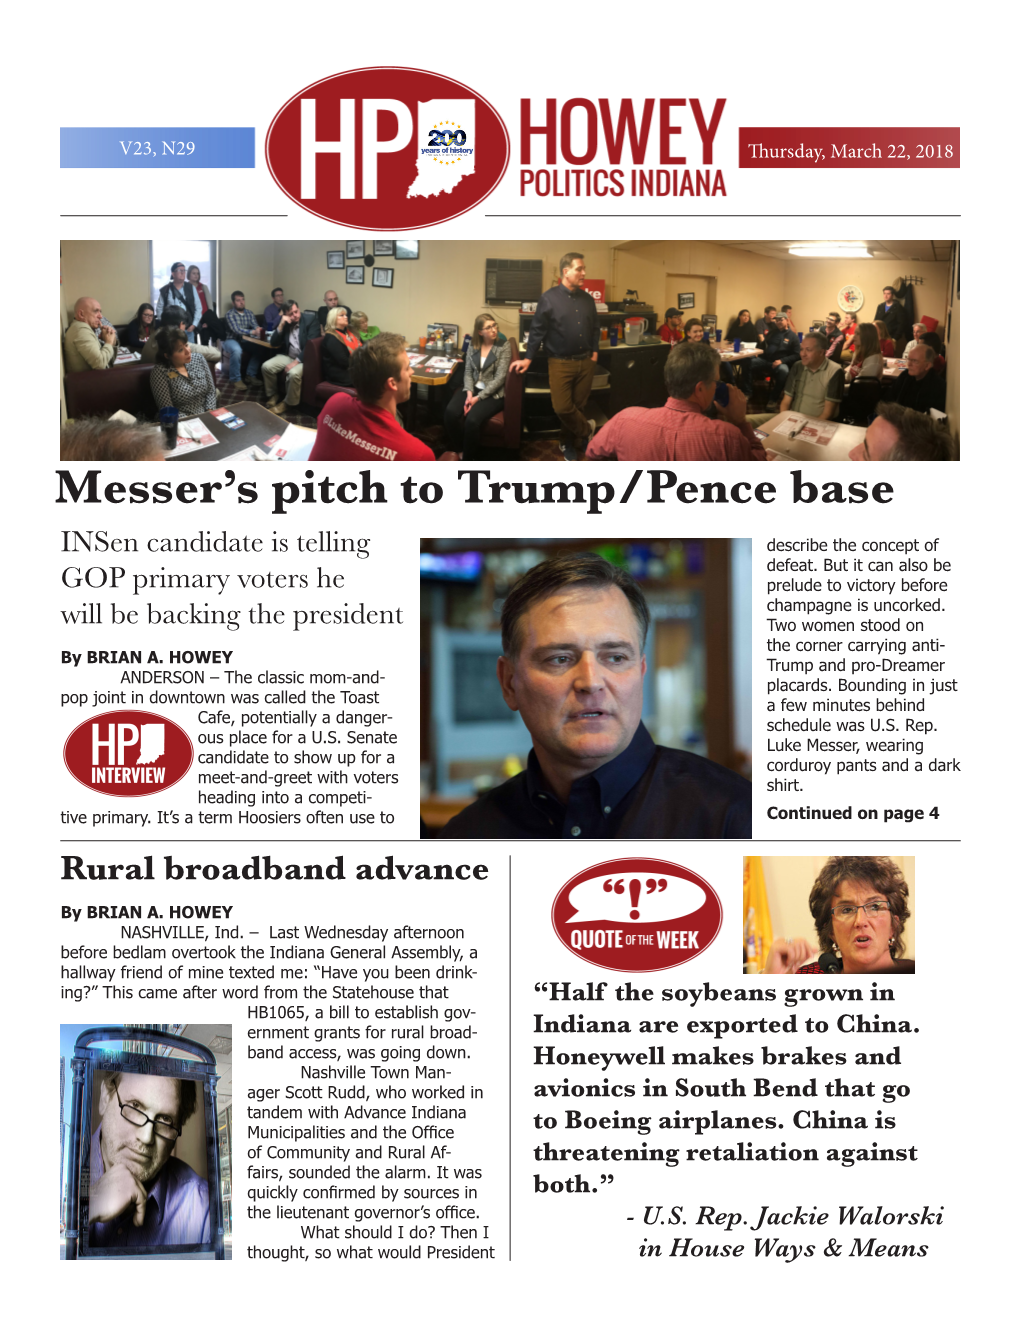 Messer's Pitch to Trump/Pence Base